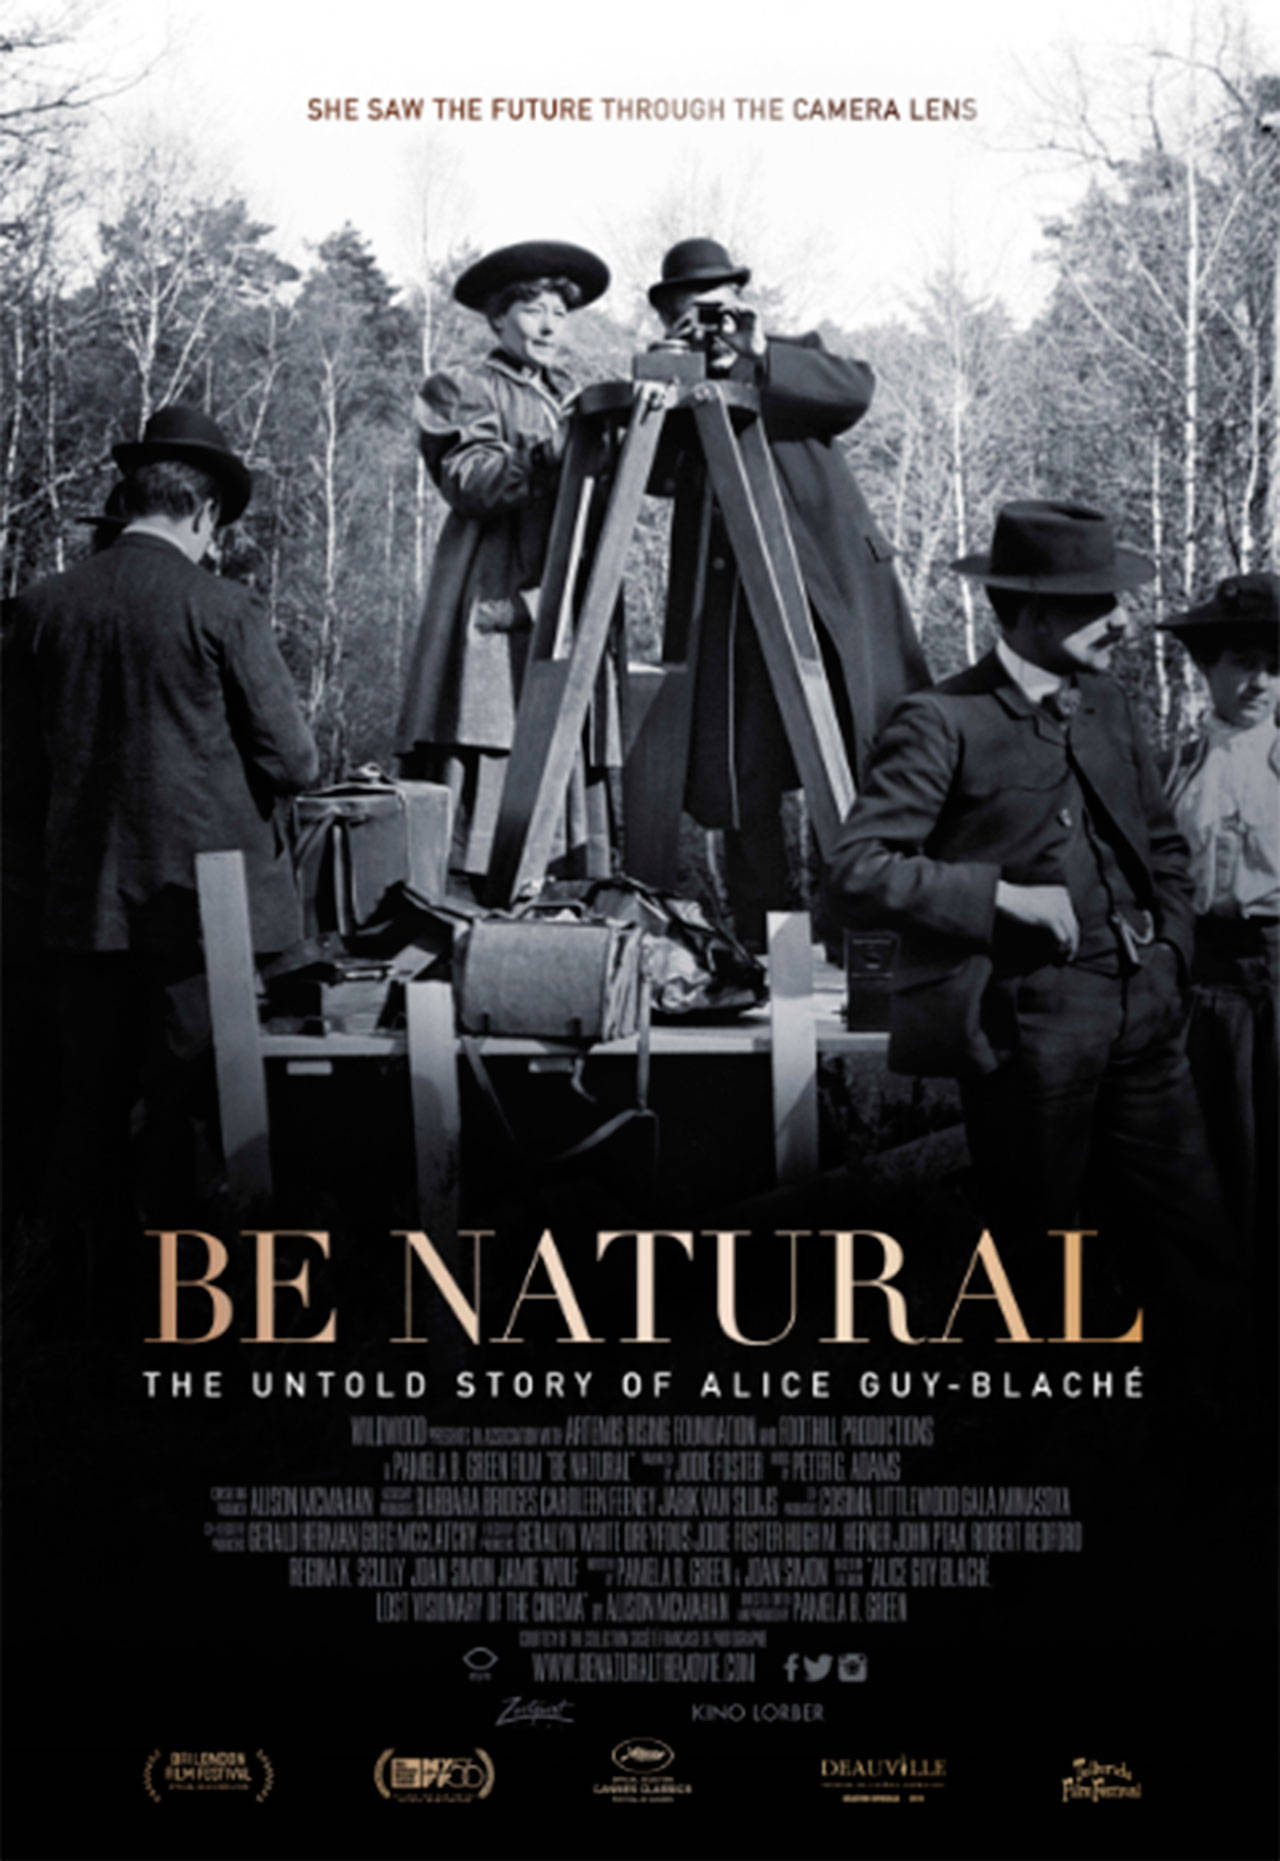 Courtesy photo | The latest Bainbridge Island Museum of Art smARTfilm Series will continue with a showing of the documentary “Be Natural: The Untold Story of Alice Guy-Blaché” (2018) at 7:30 p.m. Tuesday, Feb. 12.